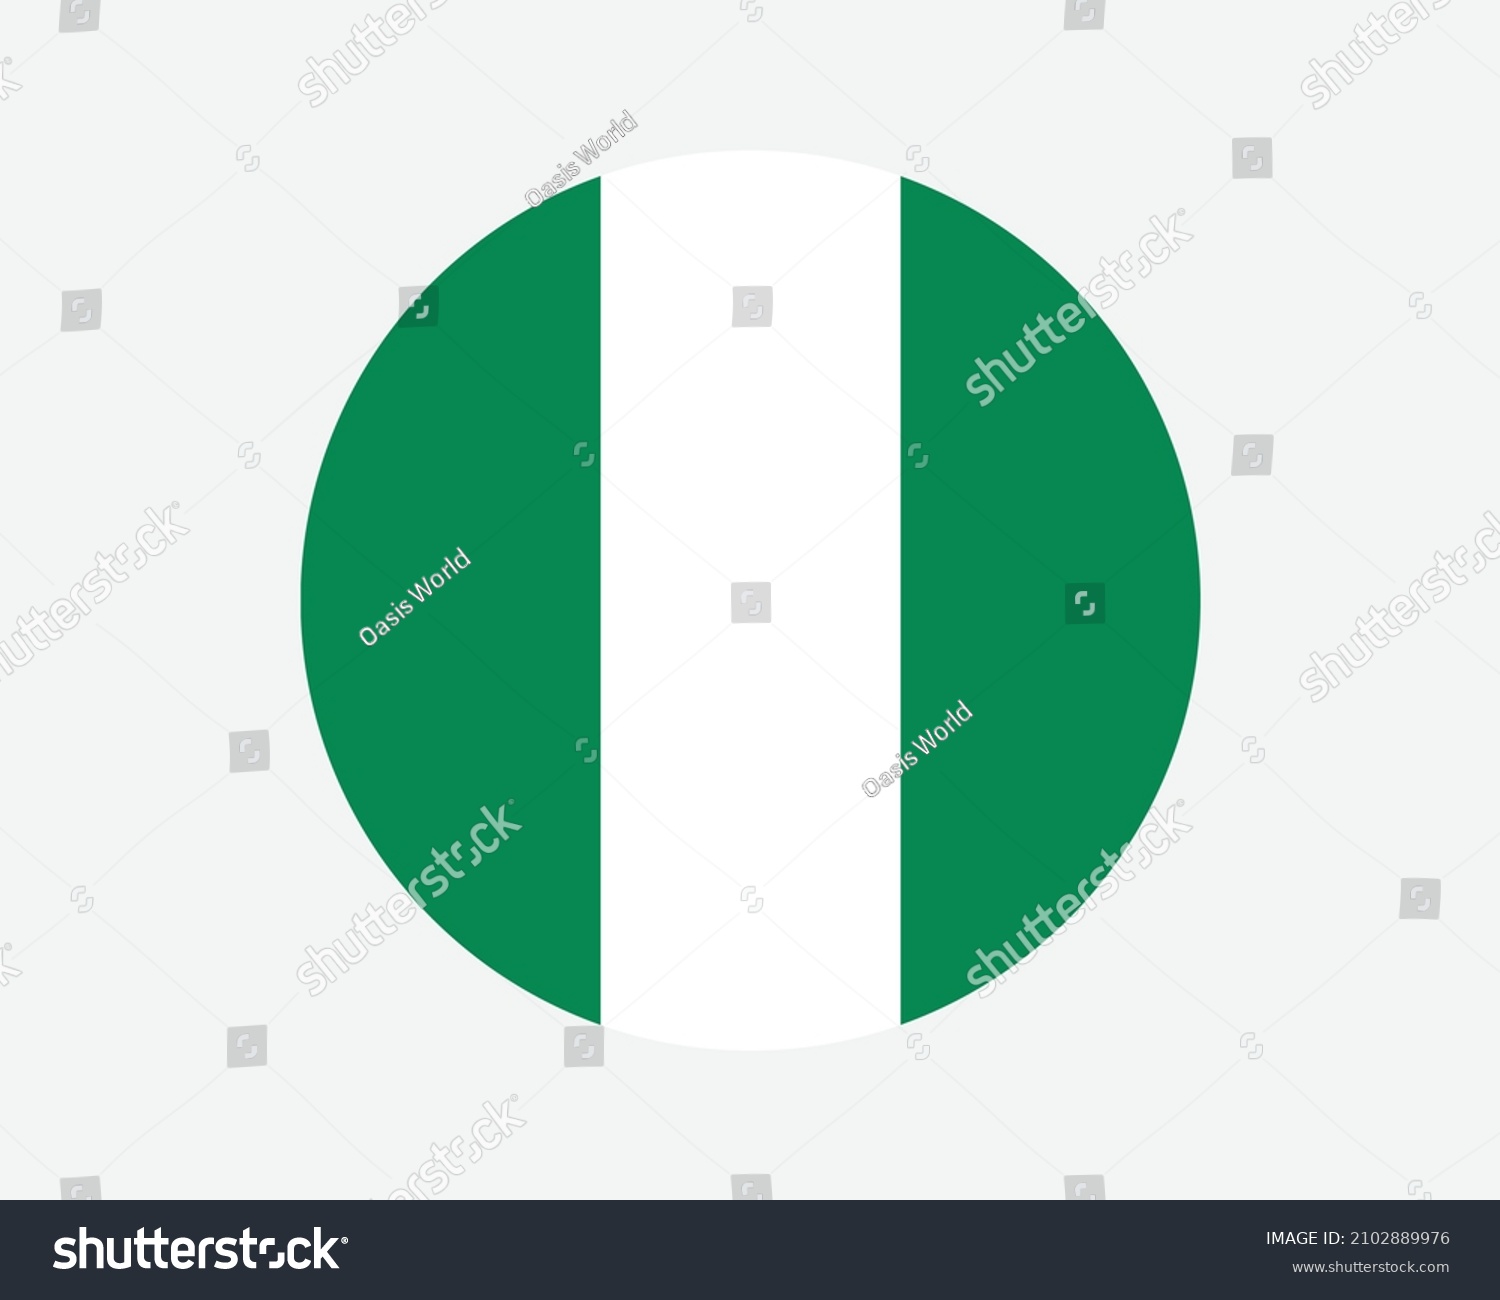 SVG of Nigeria Round Country Flag. Nigerian Circle National Flag. Federal Republic of Nigeria Circular Shape Button Banner. EPS Vector Illustration. svg